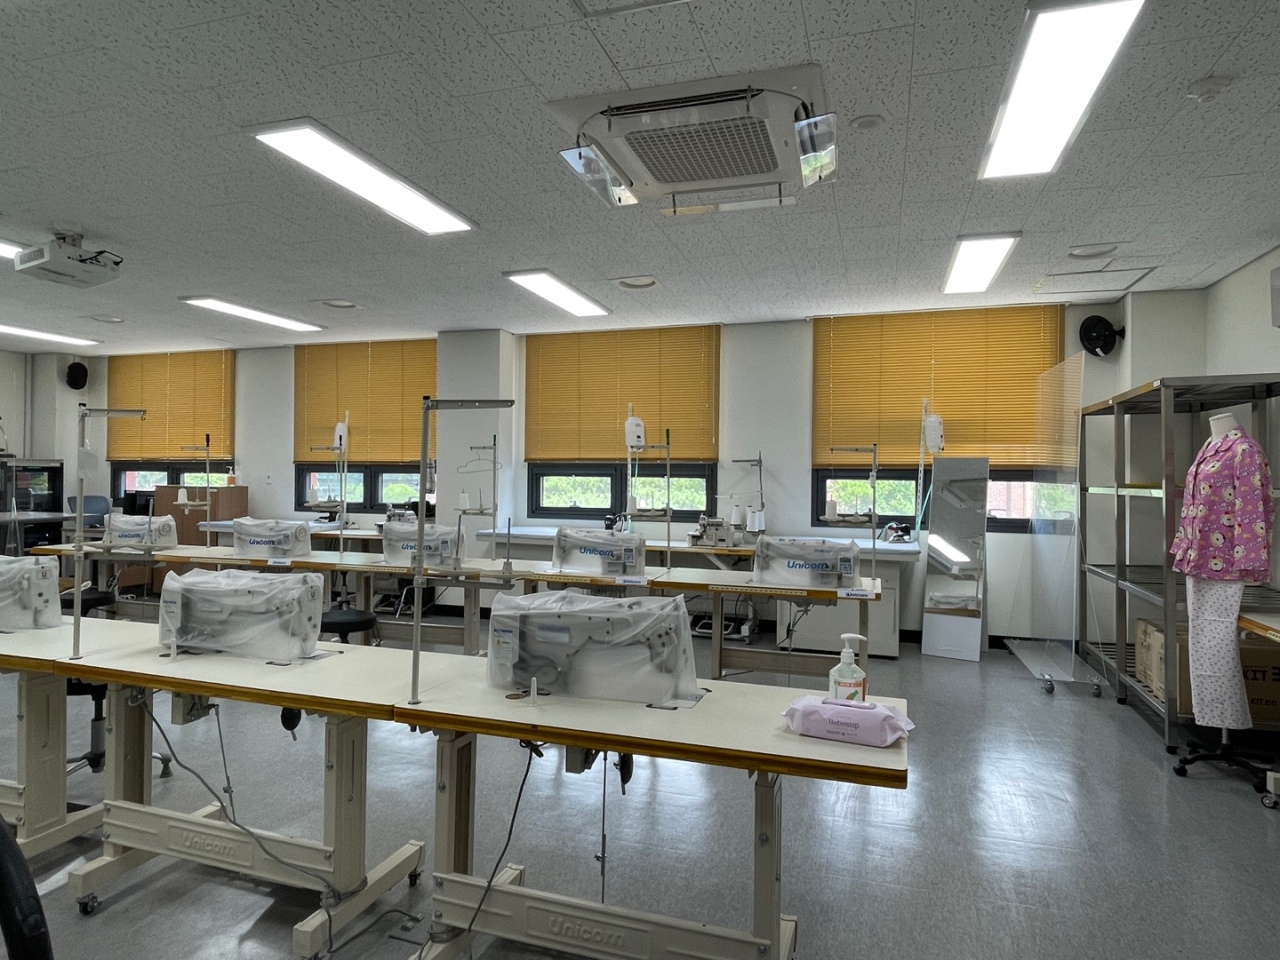 North Korean defectors can take vocational courses in sewing and clothing alteration at the Hanawon Vocational Training Center.  (Ji Da-gyum/The Korea Herald)